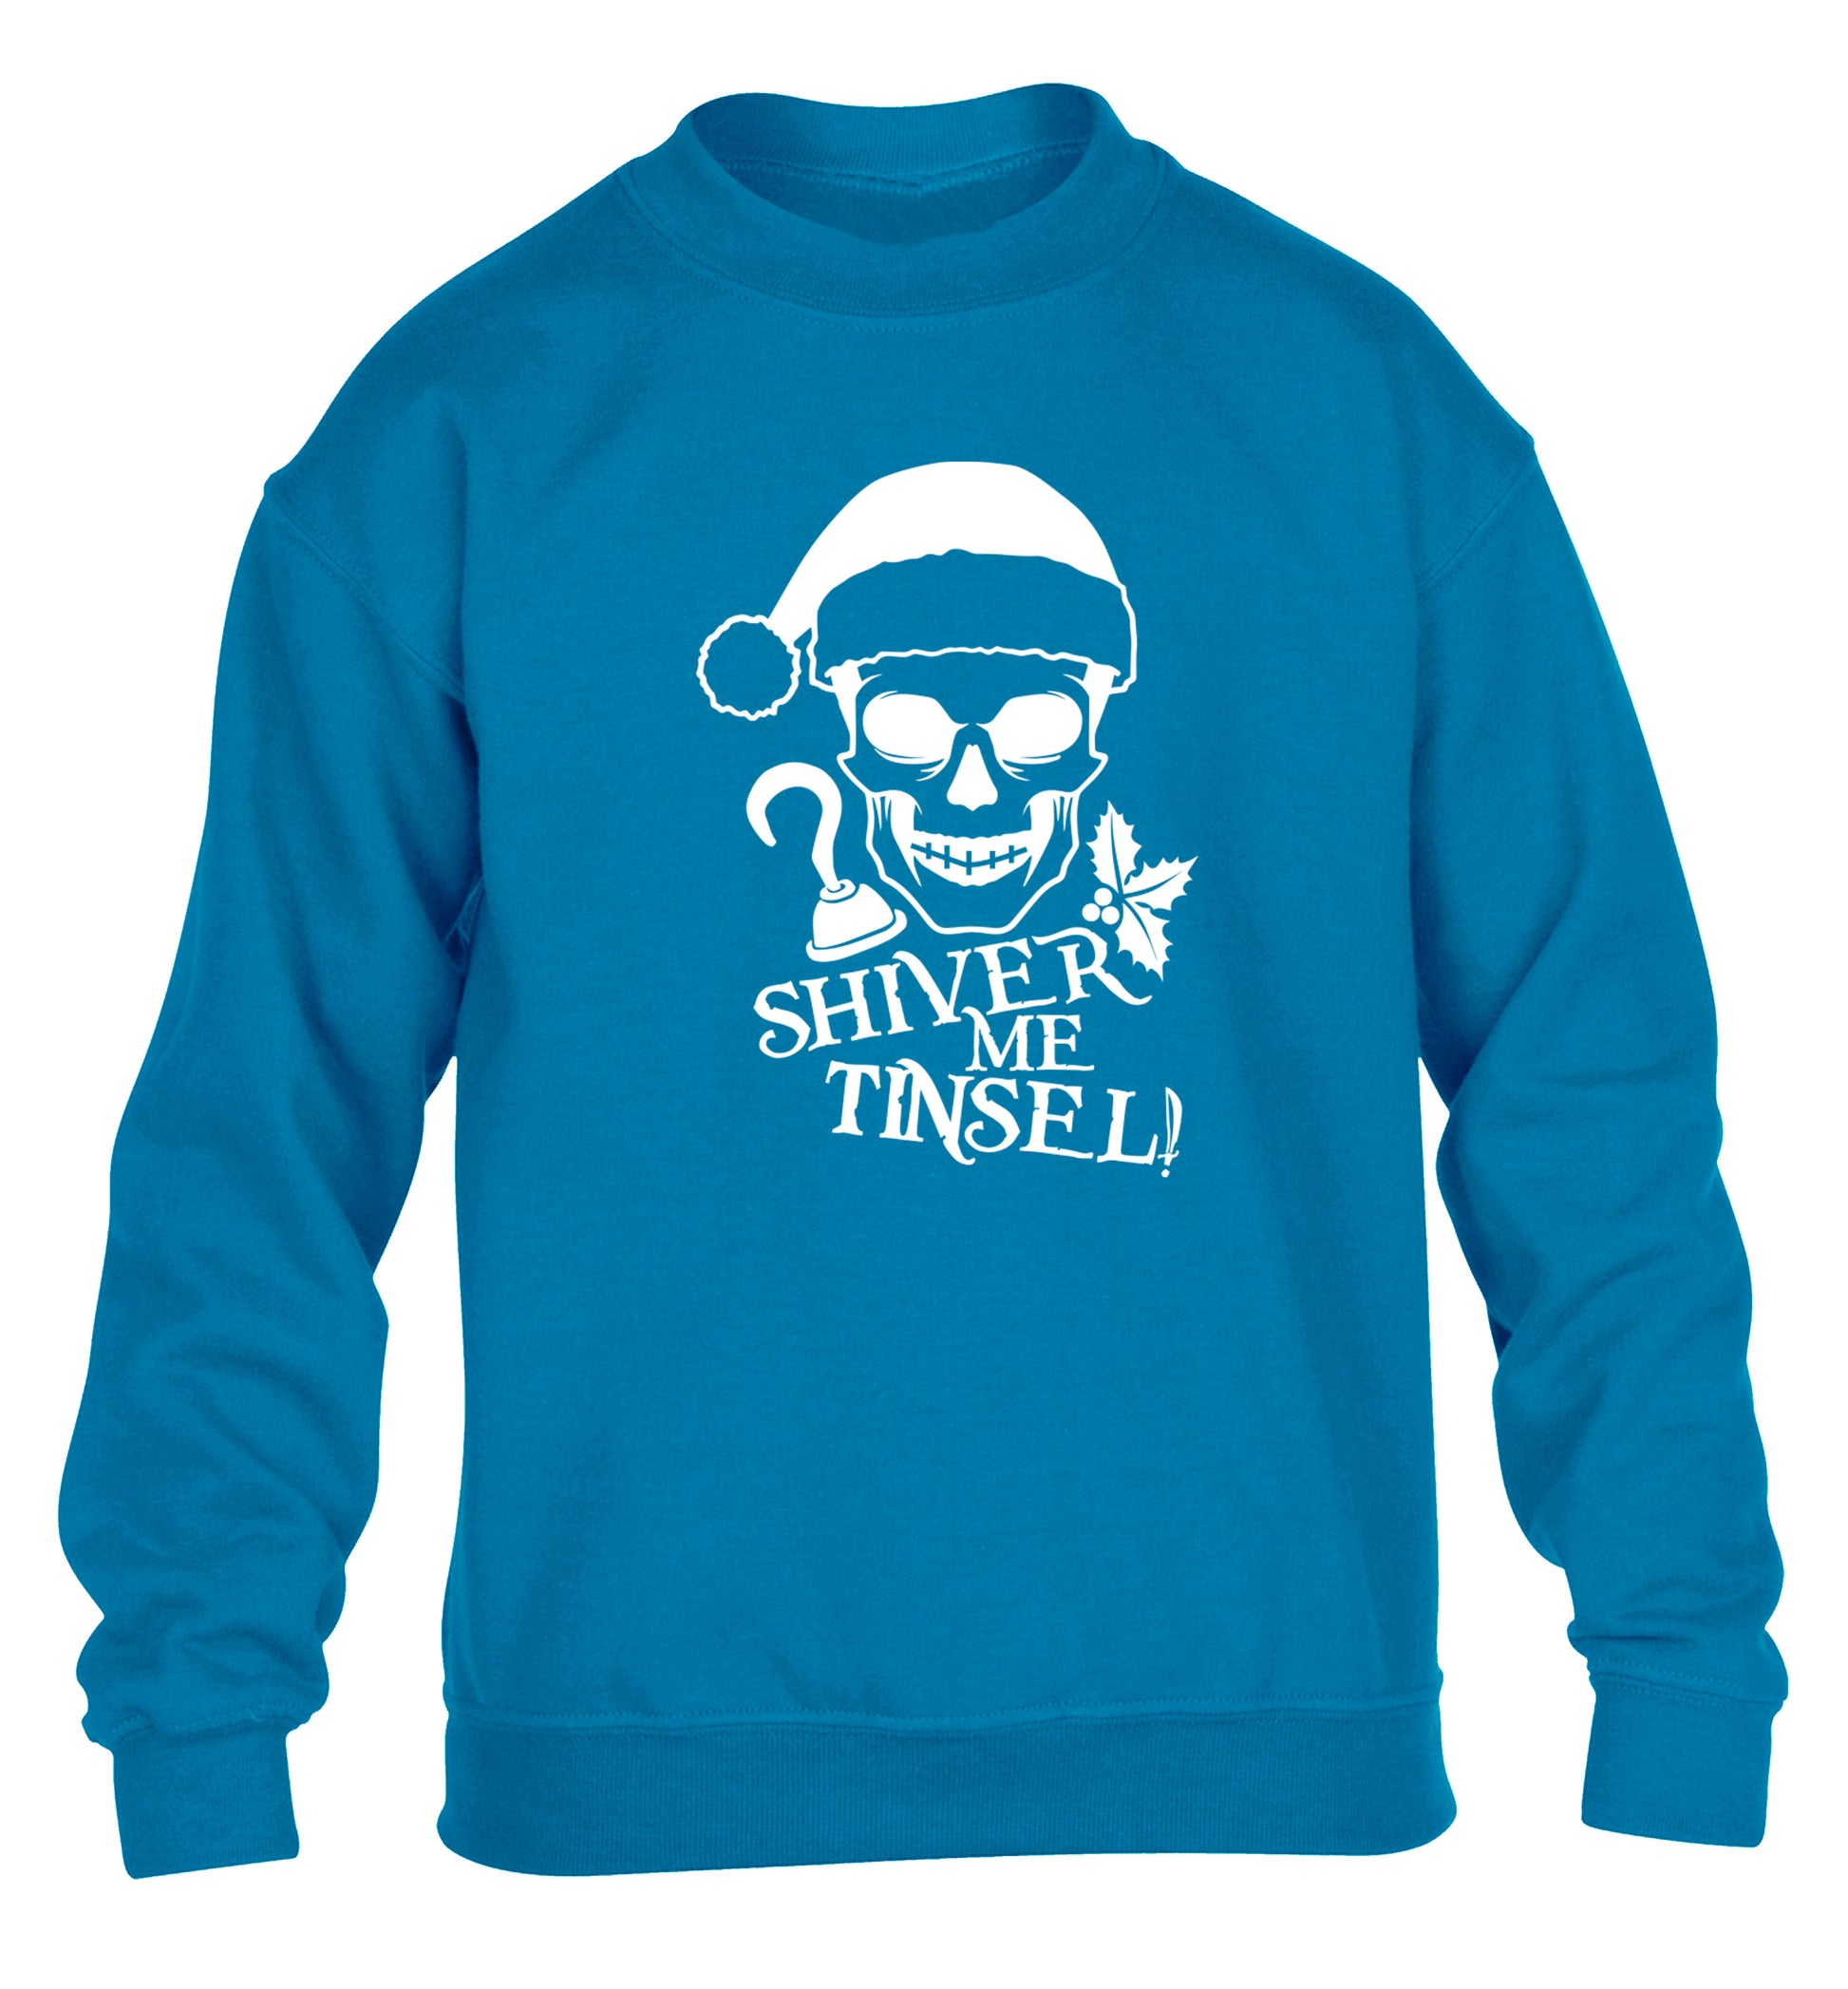 Shiver me tinsel children's blue sweater 12-14 Years